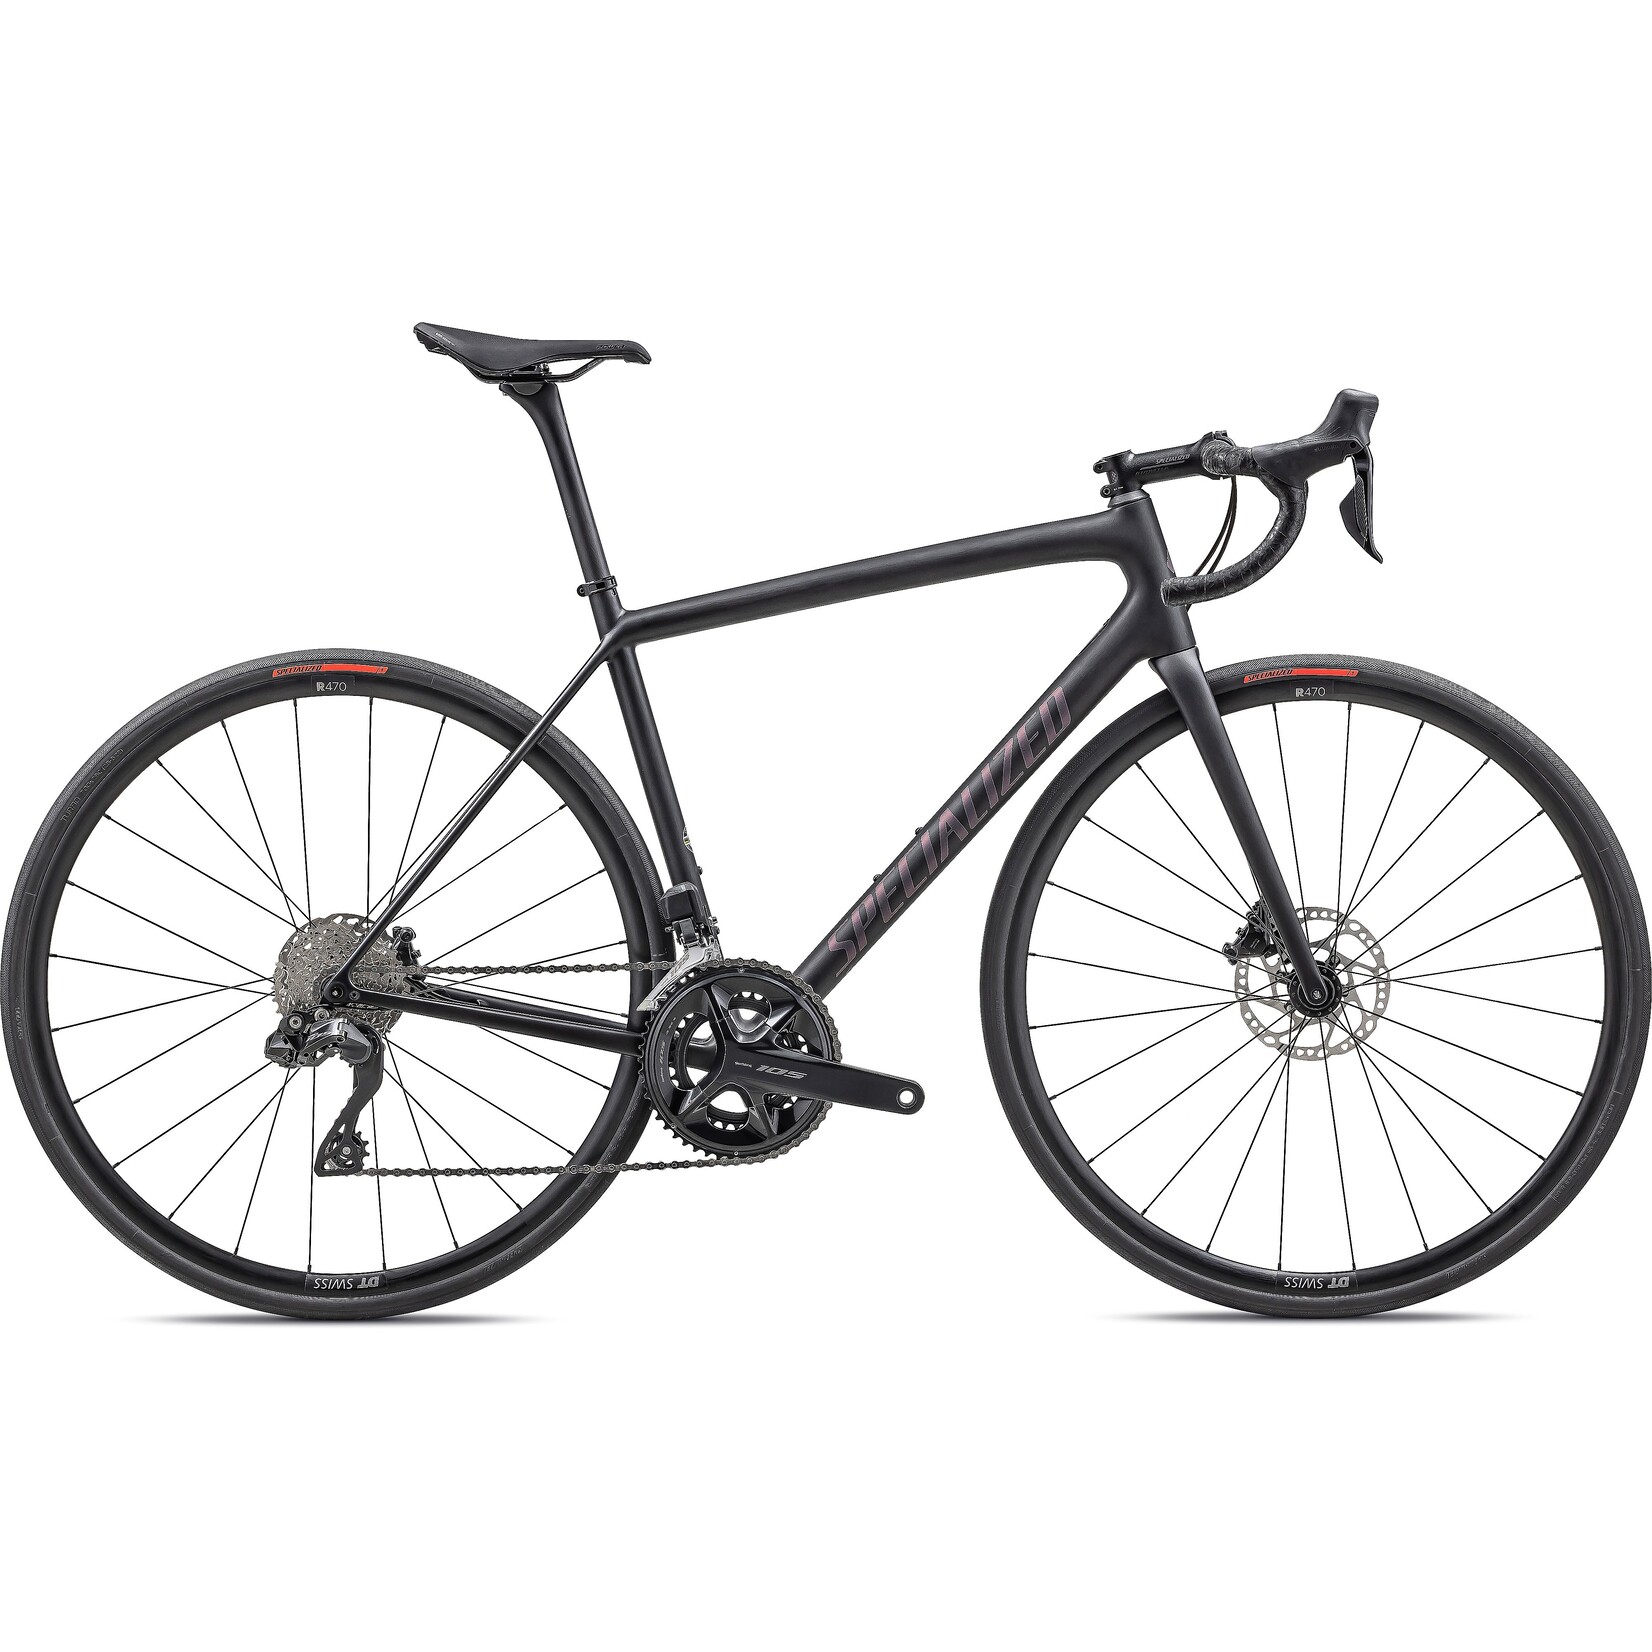 Specialized Aethos Comp - Shimano 105 Di2 in Satin Carbon/Abalone over Carbon